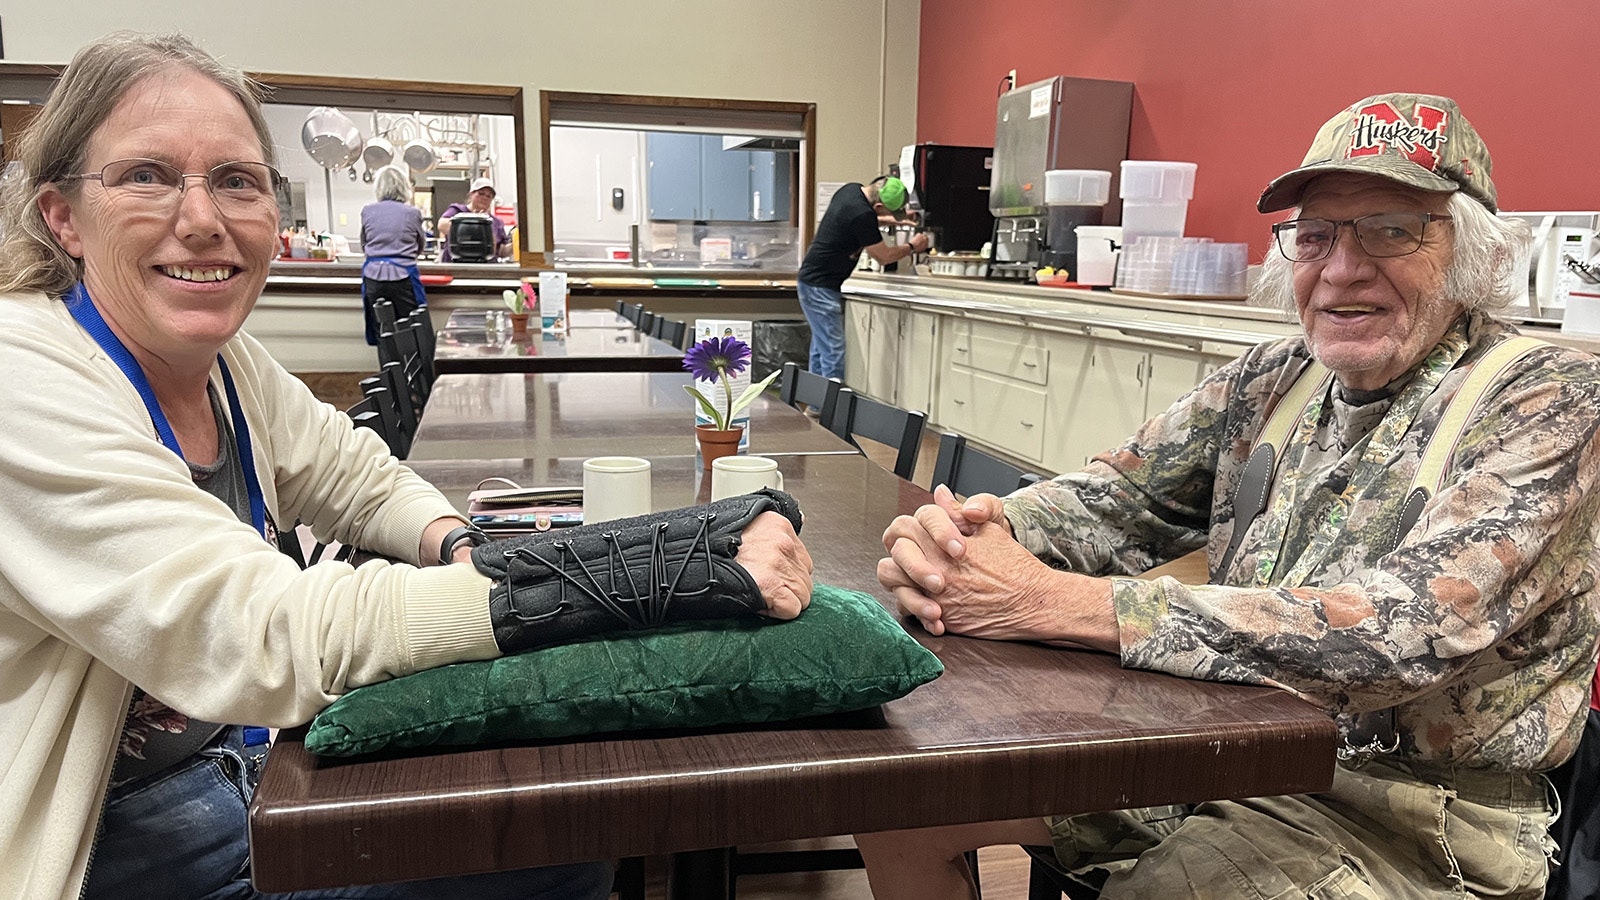 Dee Ownsby, left, chats with Bob Stephenson Friday at the Hot Springs Senior Citizen Center. They both said Sgt. Mike Mascorro is a great cop and should be on active duty for the Thermopolis Police Department.